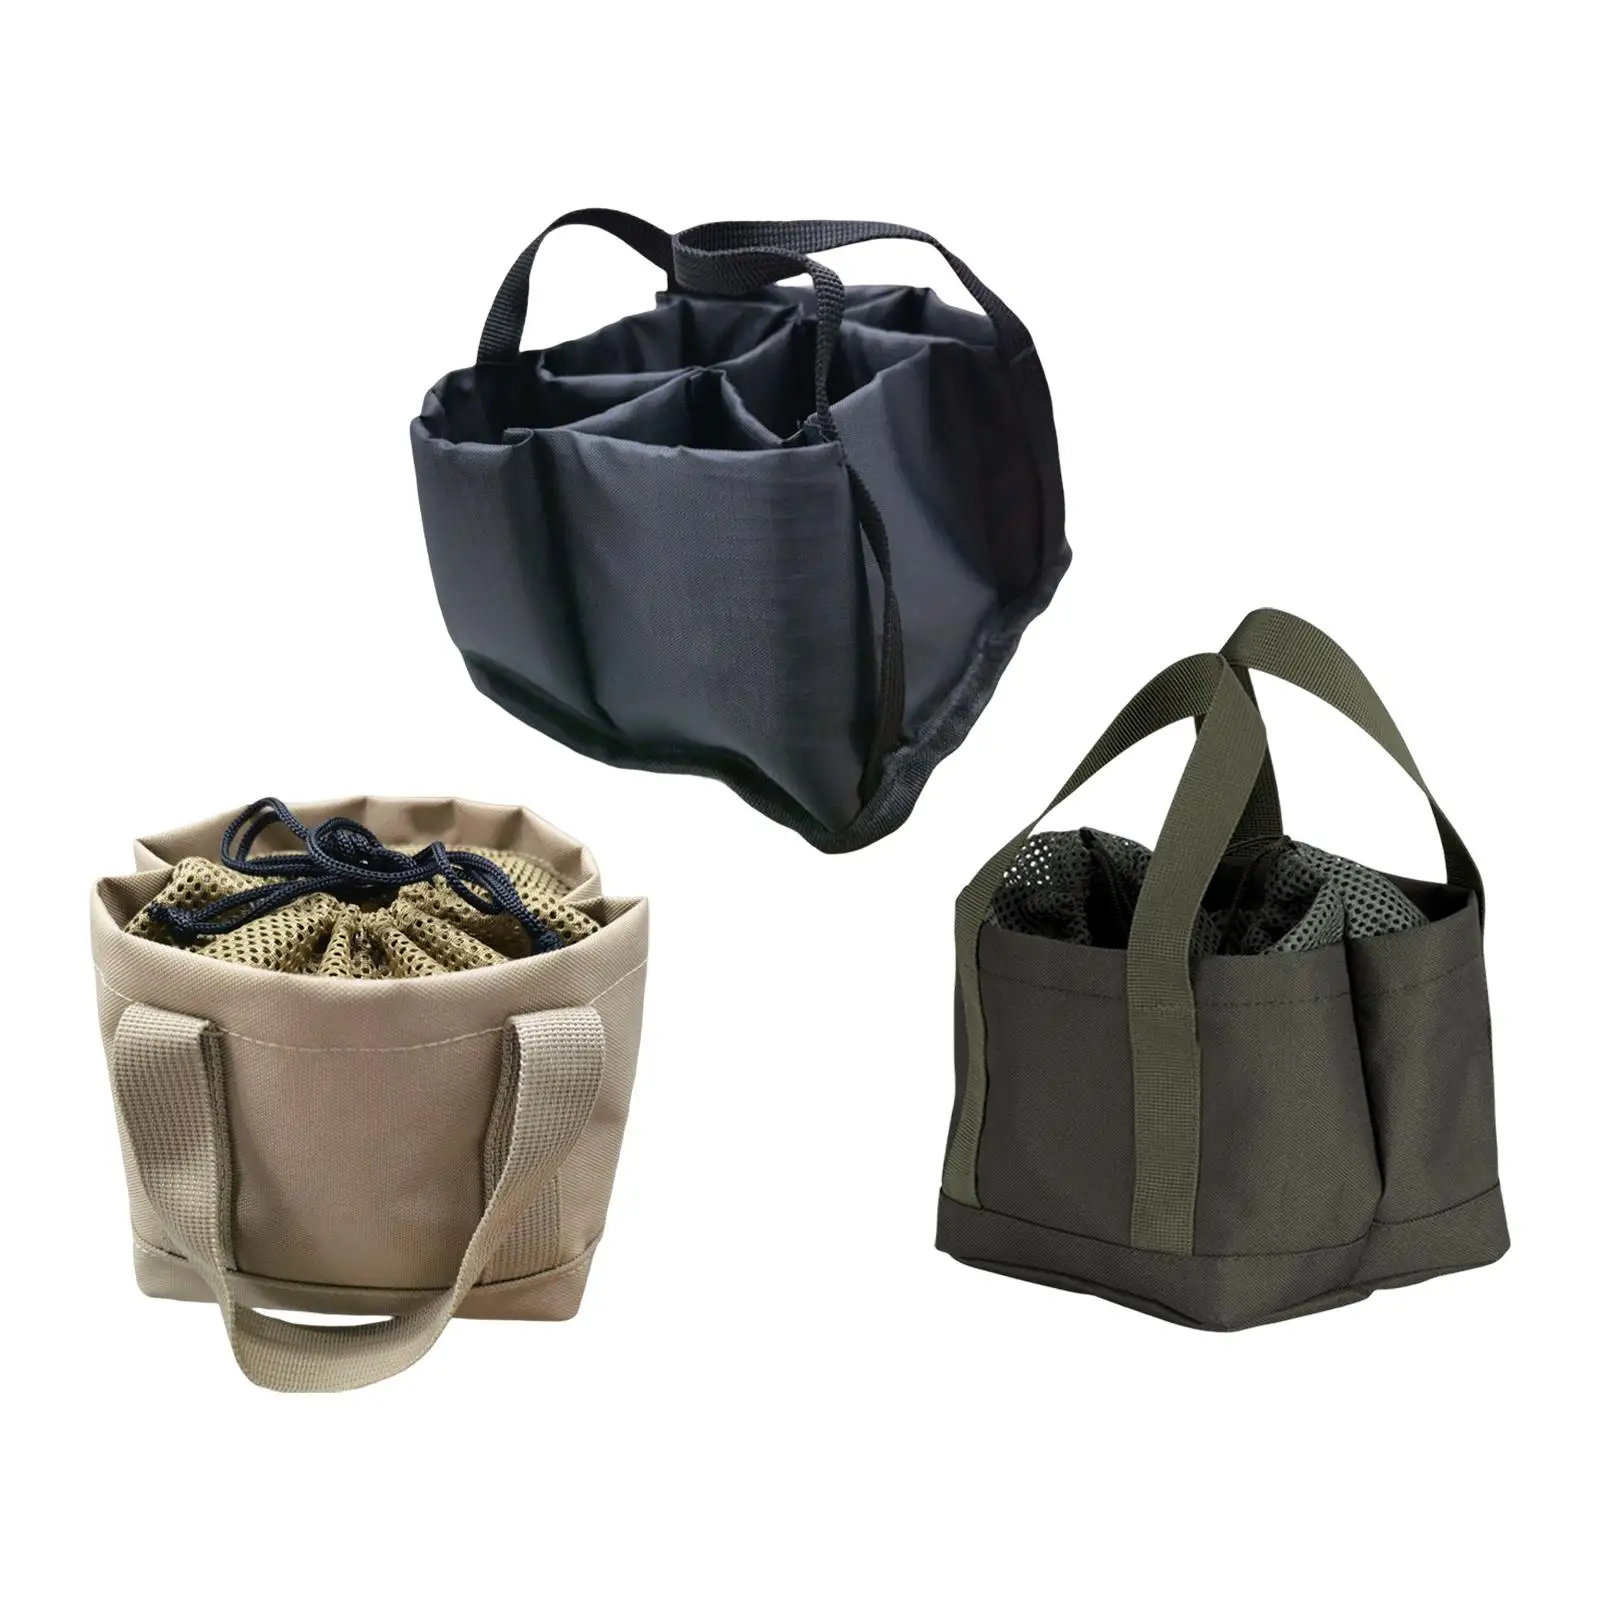 Camping Storage Bag Multi Function Makeup Bag kitchen Accessories Cookware Basket for Condiments Jars Picnic BBQ Fishing